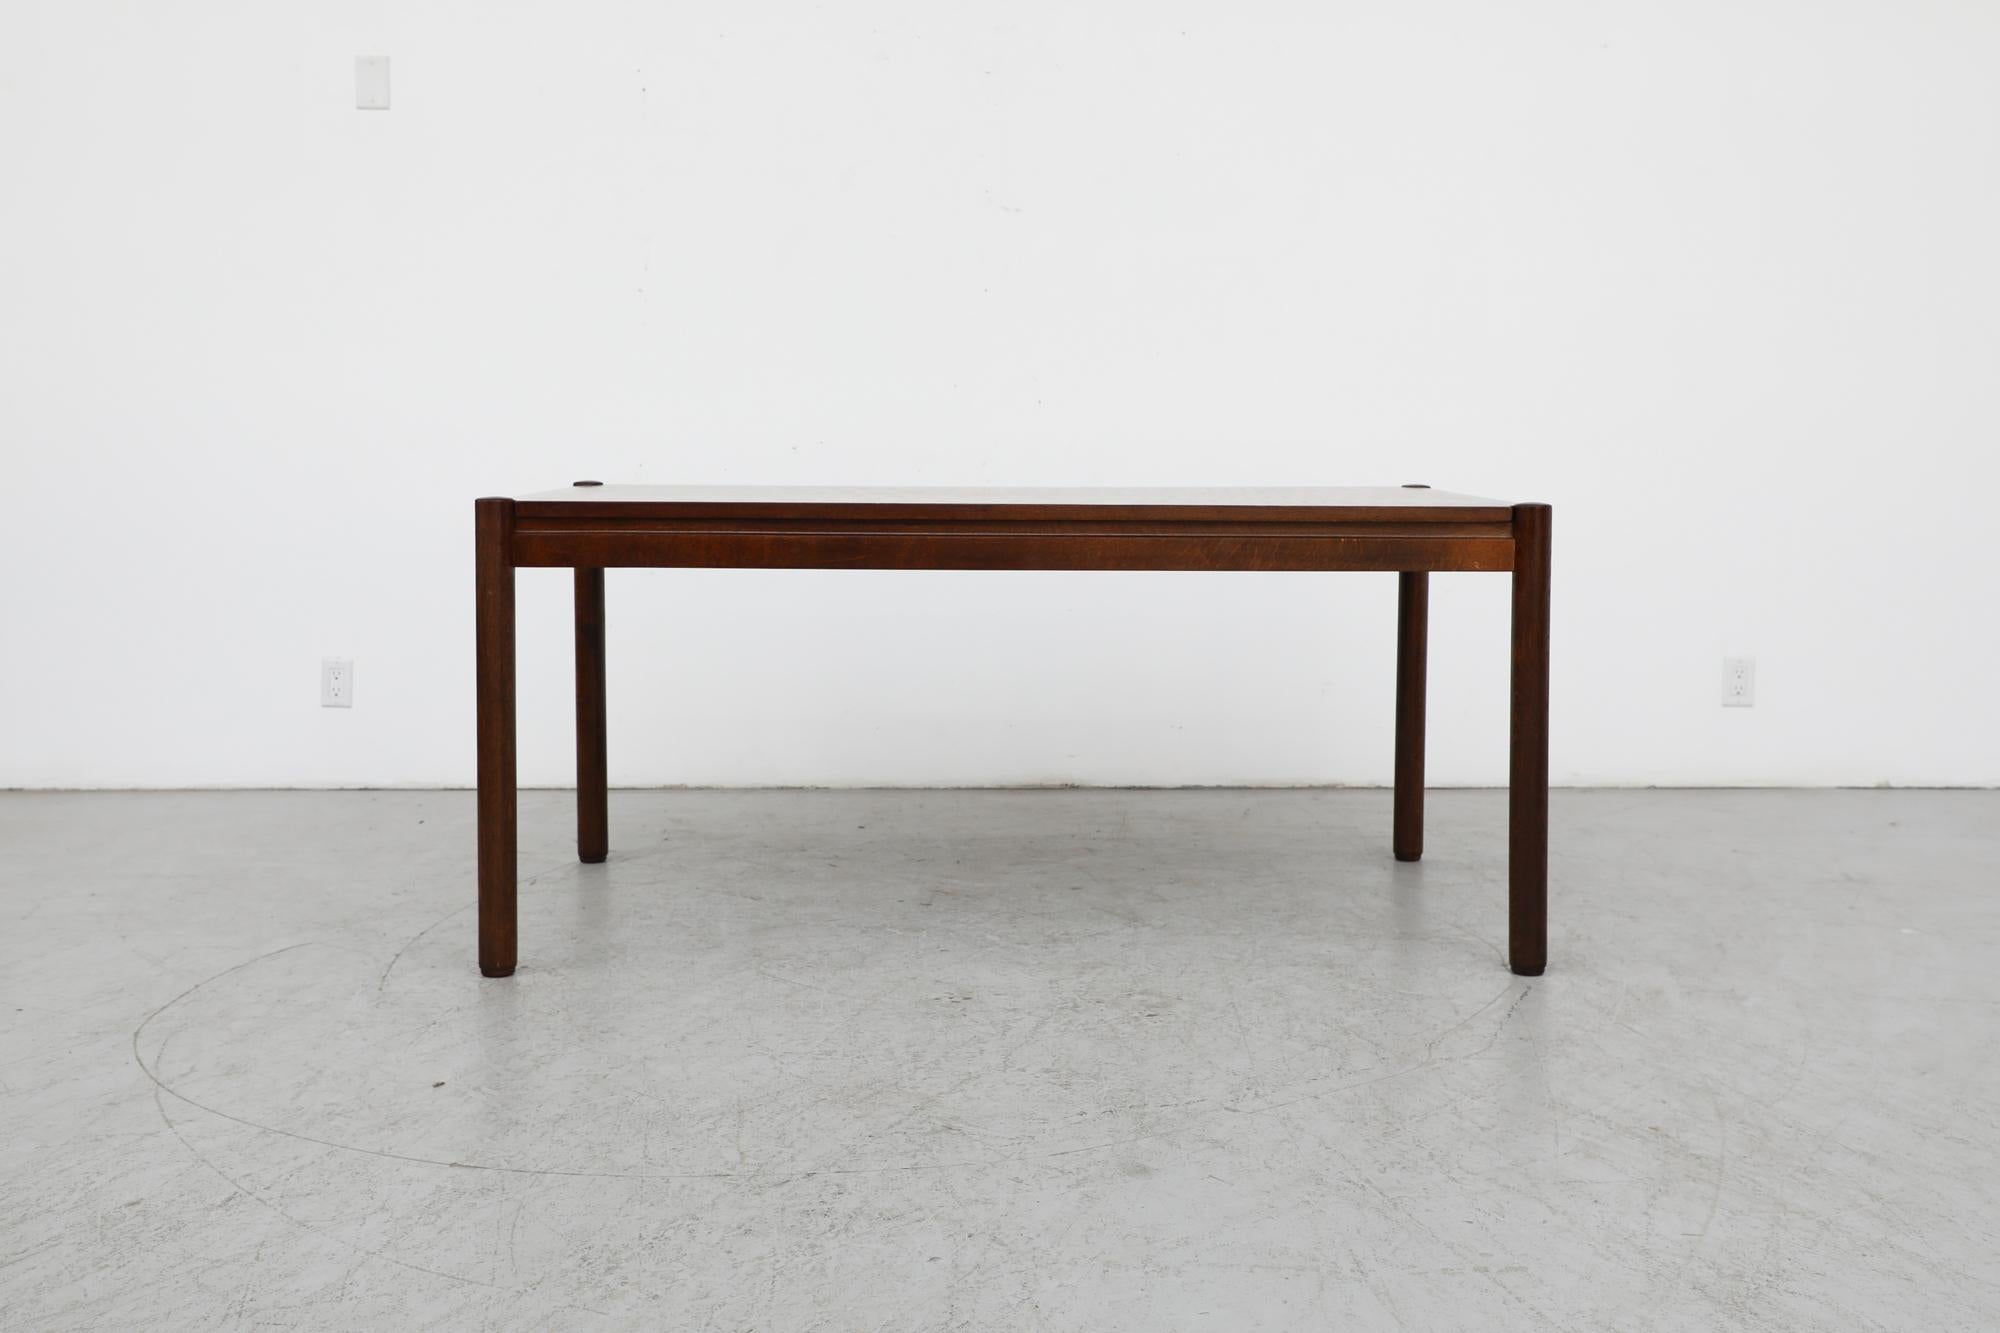 Mid-Century Vico Magistretti inspired dark oak dining table with a classic design. The table is in original condition with visible wear, including scratches. Wear is consistent with its age and use.